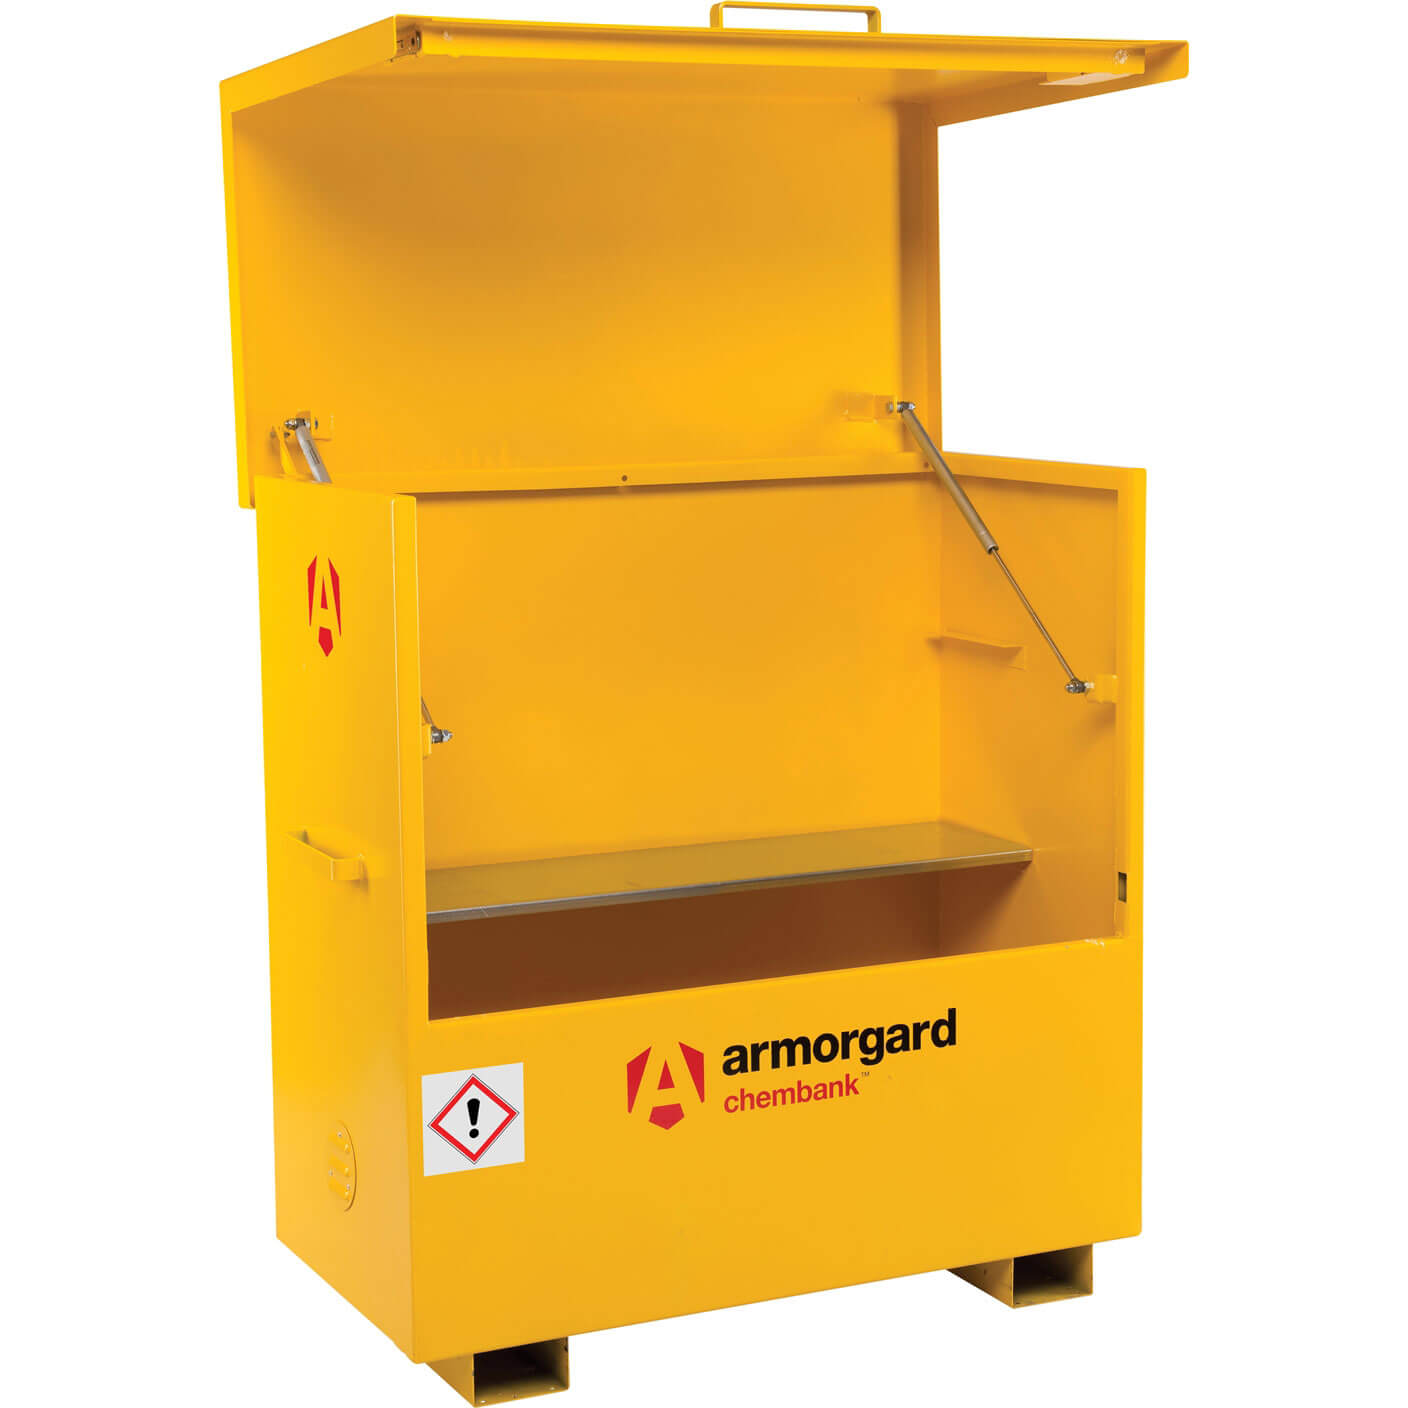 Image of Armorgard Chembank Chemicals Secure Site Storage Box 1275mm 675mm 1270mm